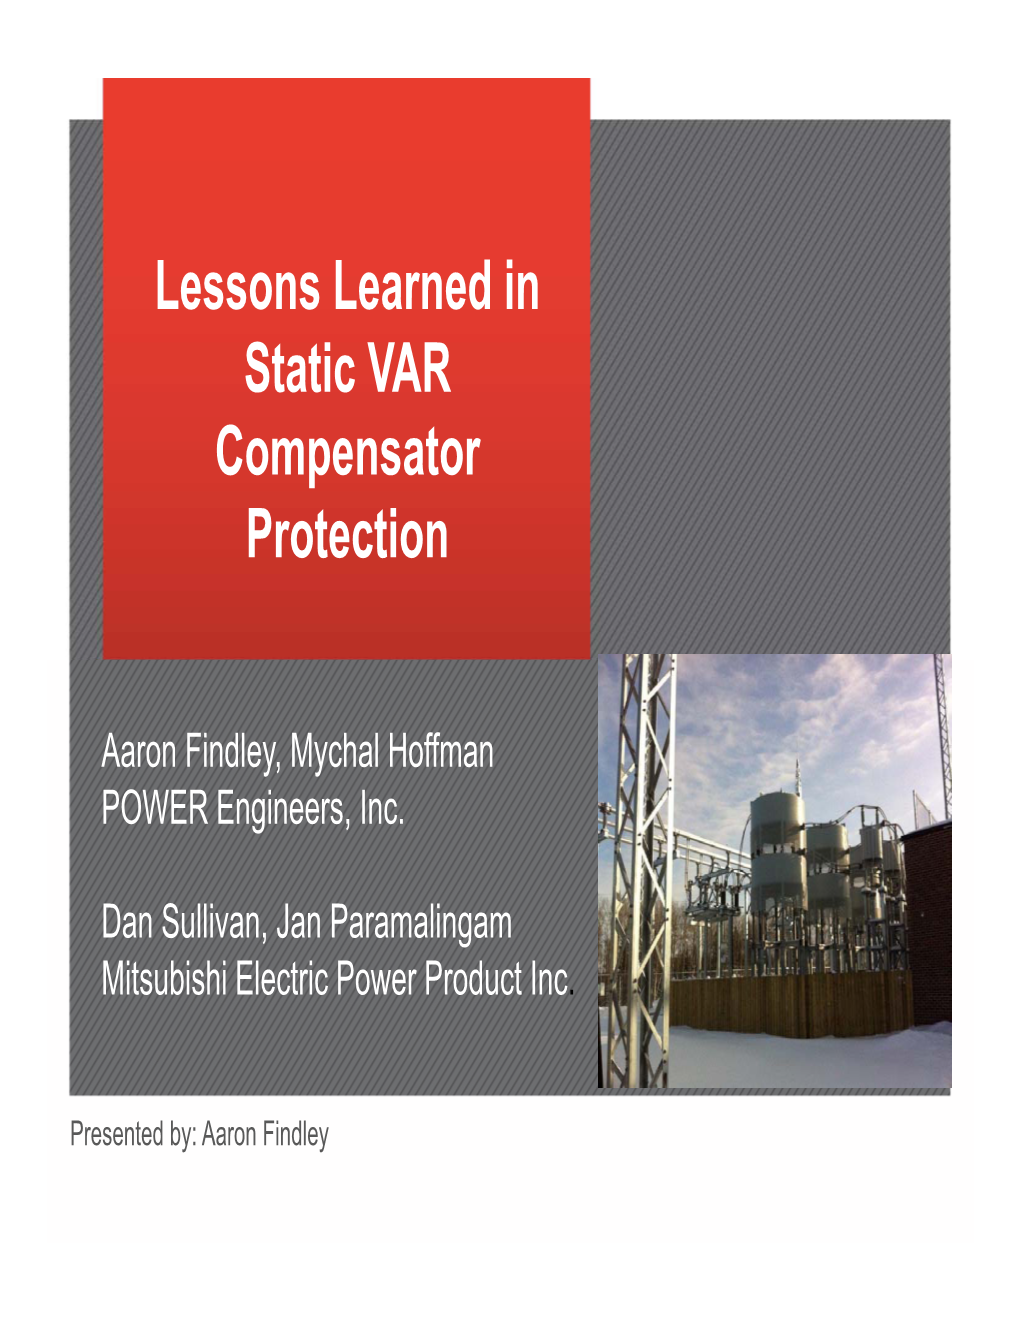 Lessons Learned in Static VAR Compensator Protection